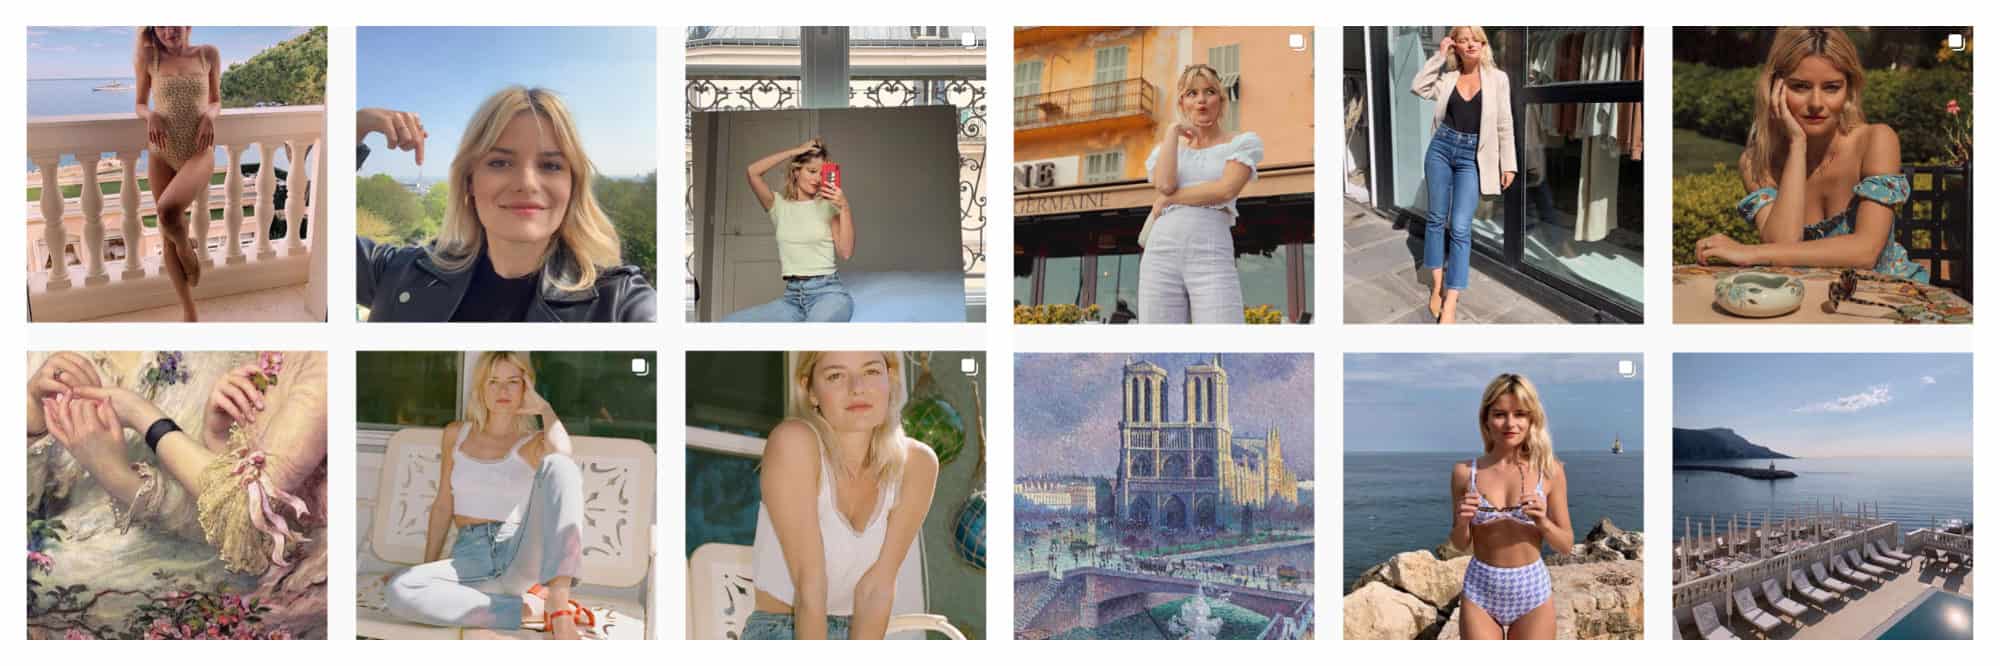 A selection of images of French Instagram fashion influencer Sabina Socol.